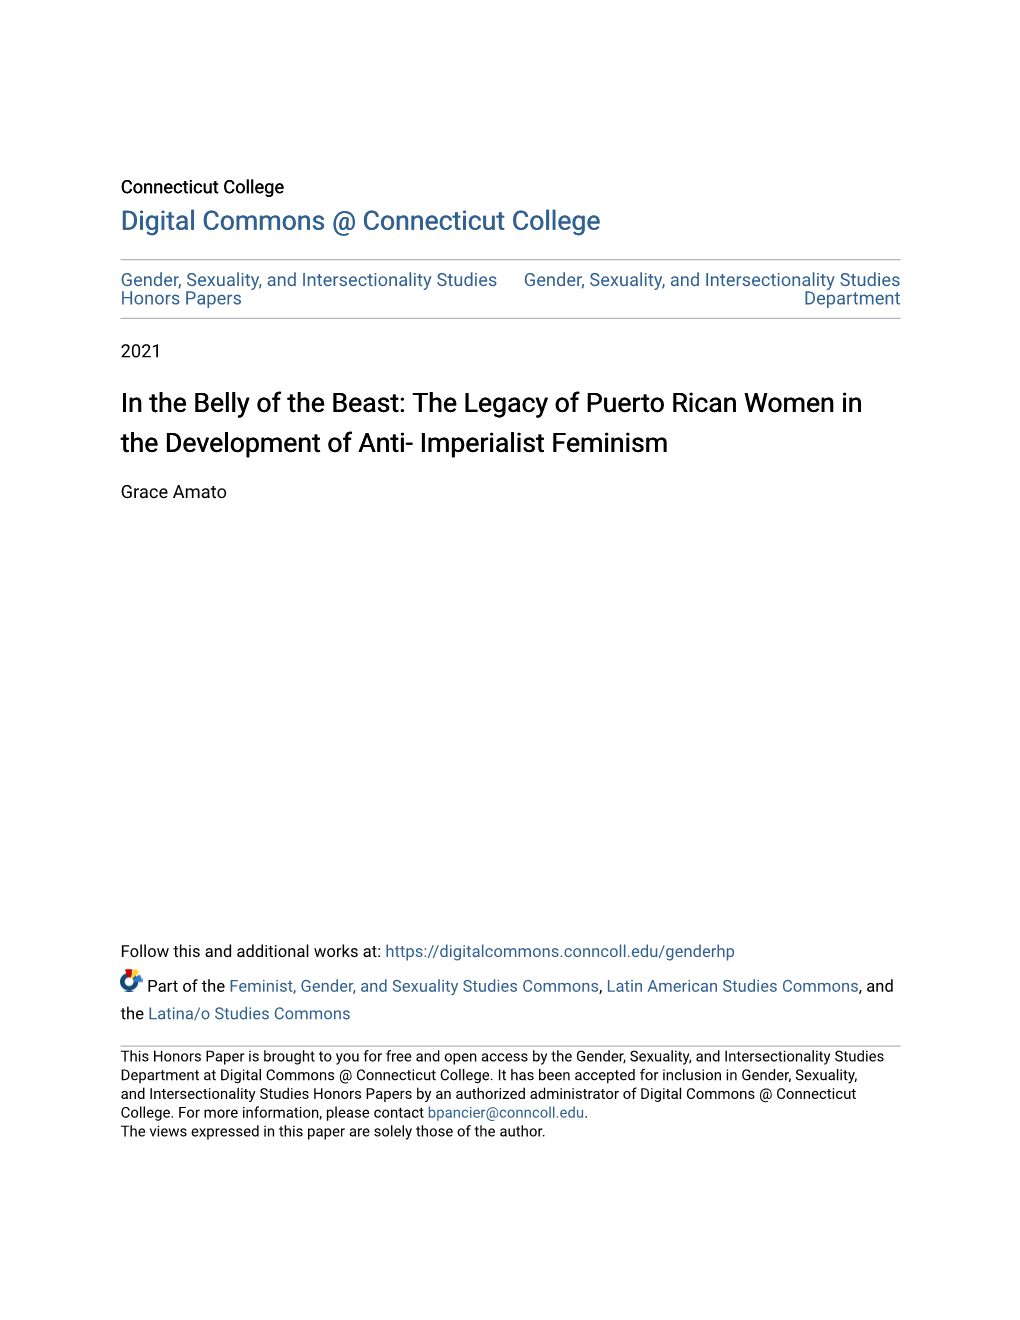 The Legacy of Puerto Rican Women in the Development of Anti- Imperialist Feminism